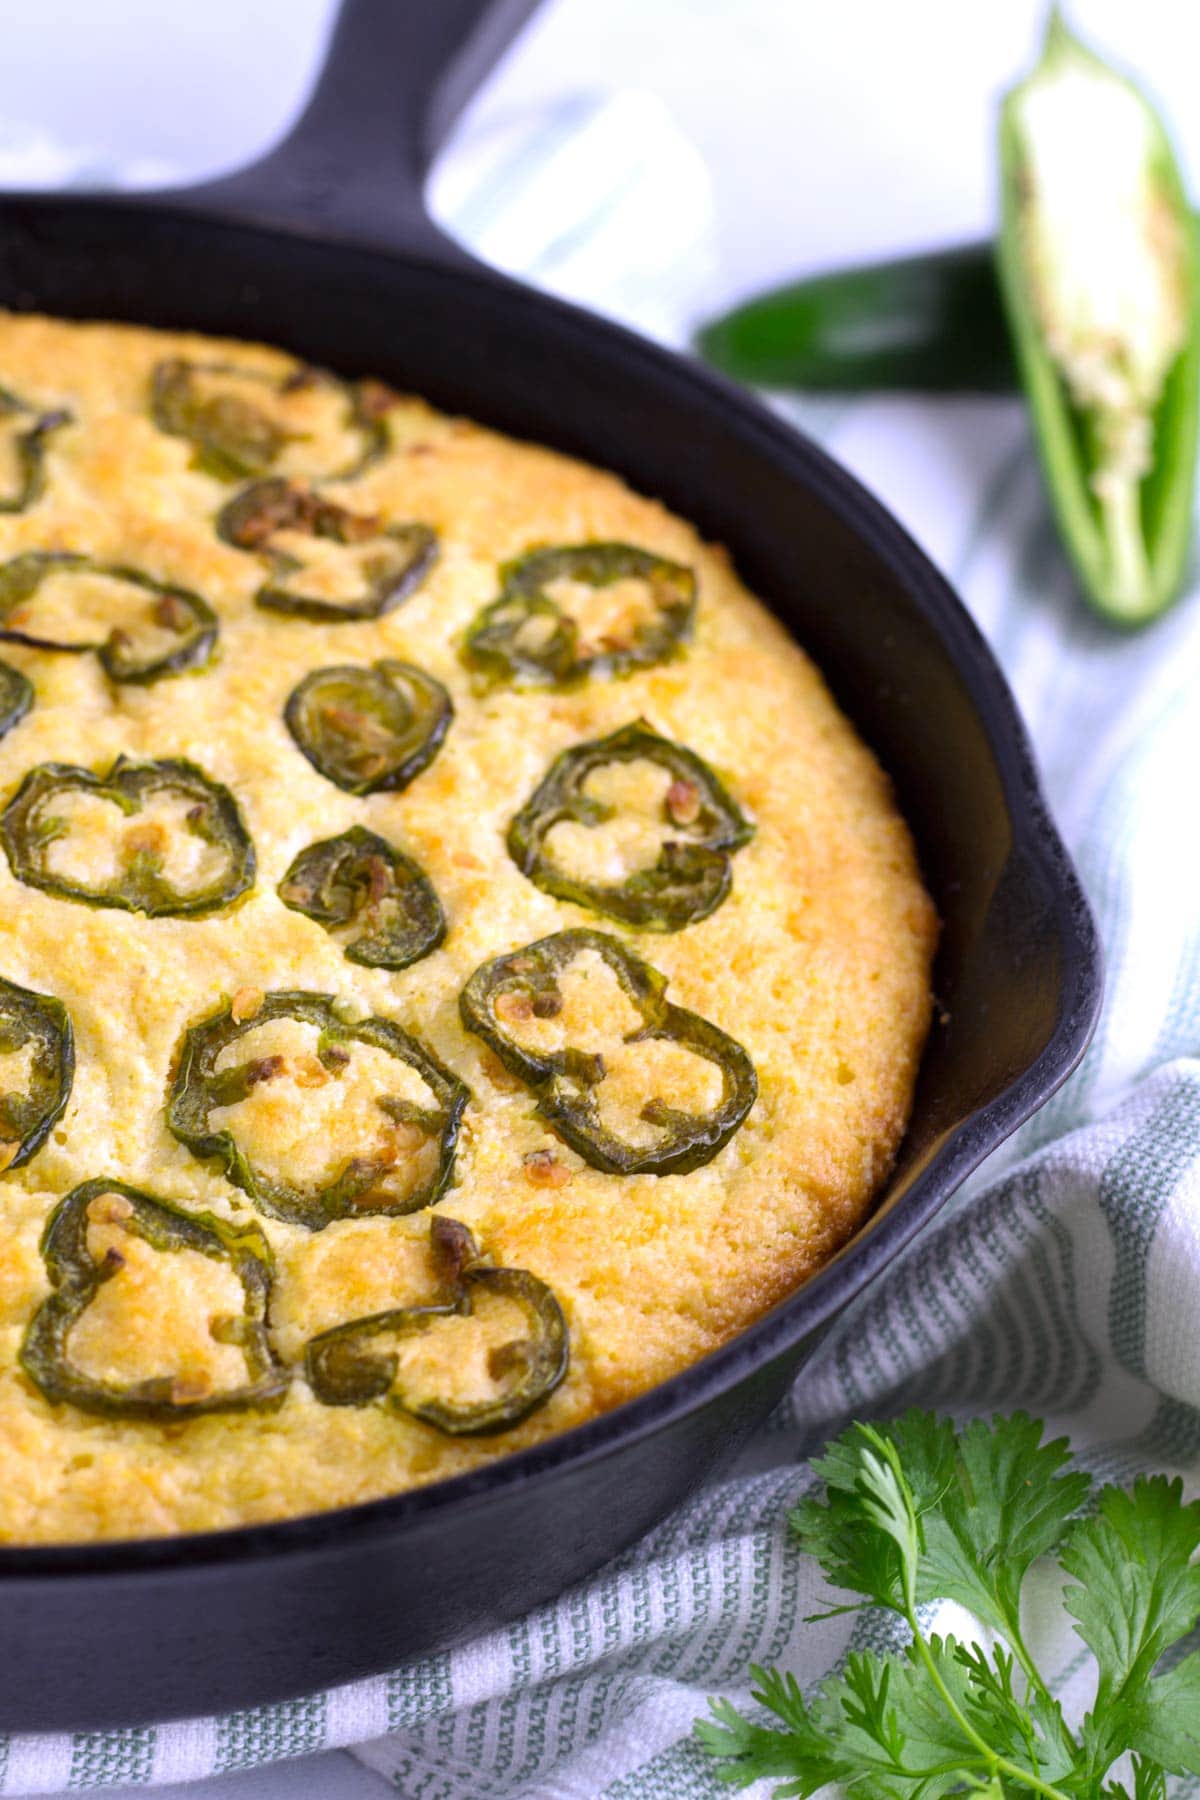 Skillet of jalapeno cornbread with towel and cilantro.